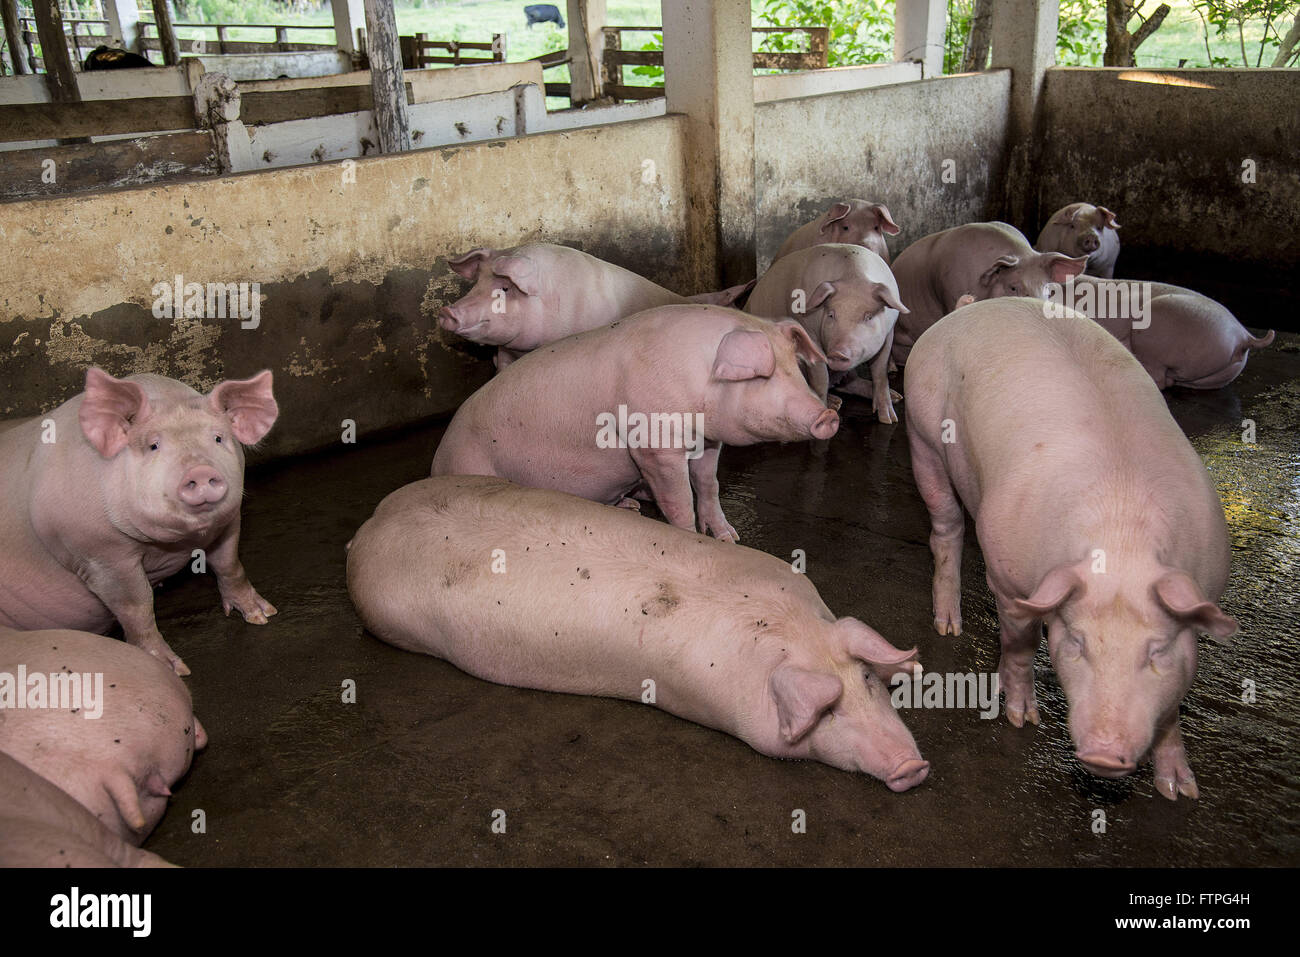 Creation of pigs in rural area Stock Photo